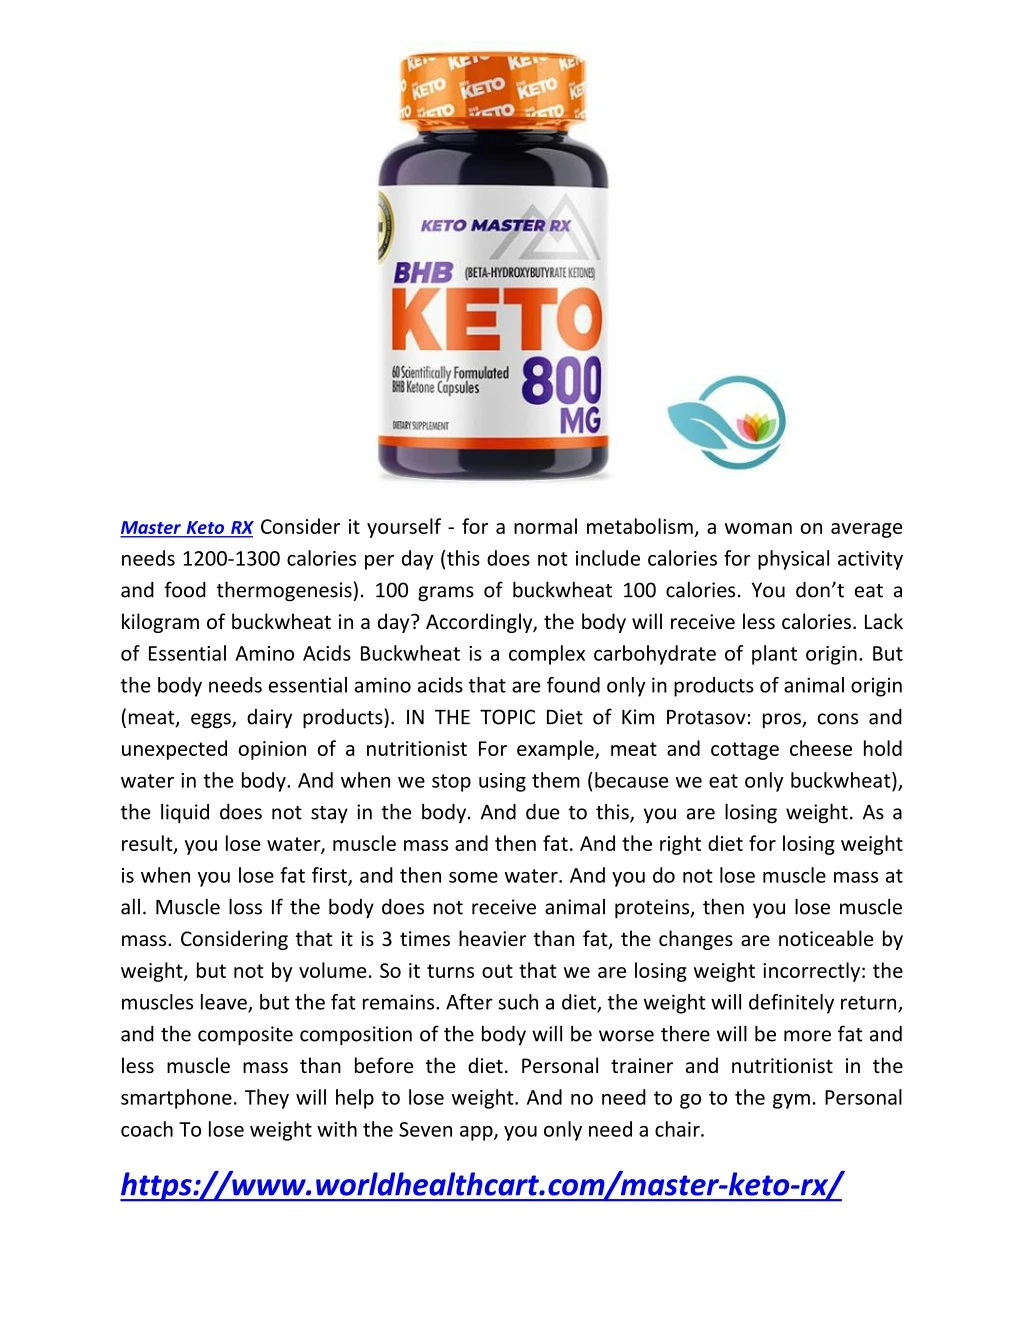 master keto rx consider it yourself for a normal